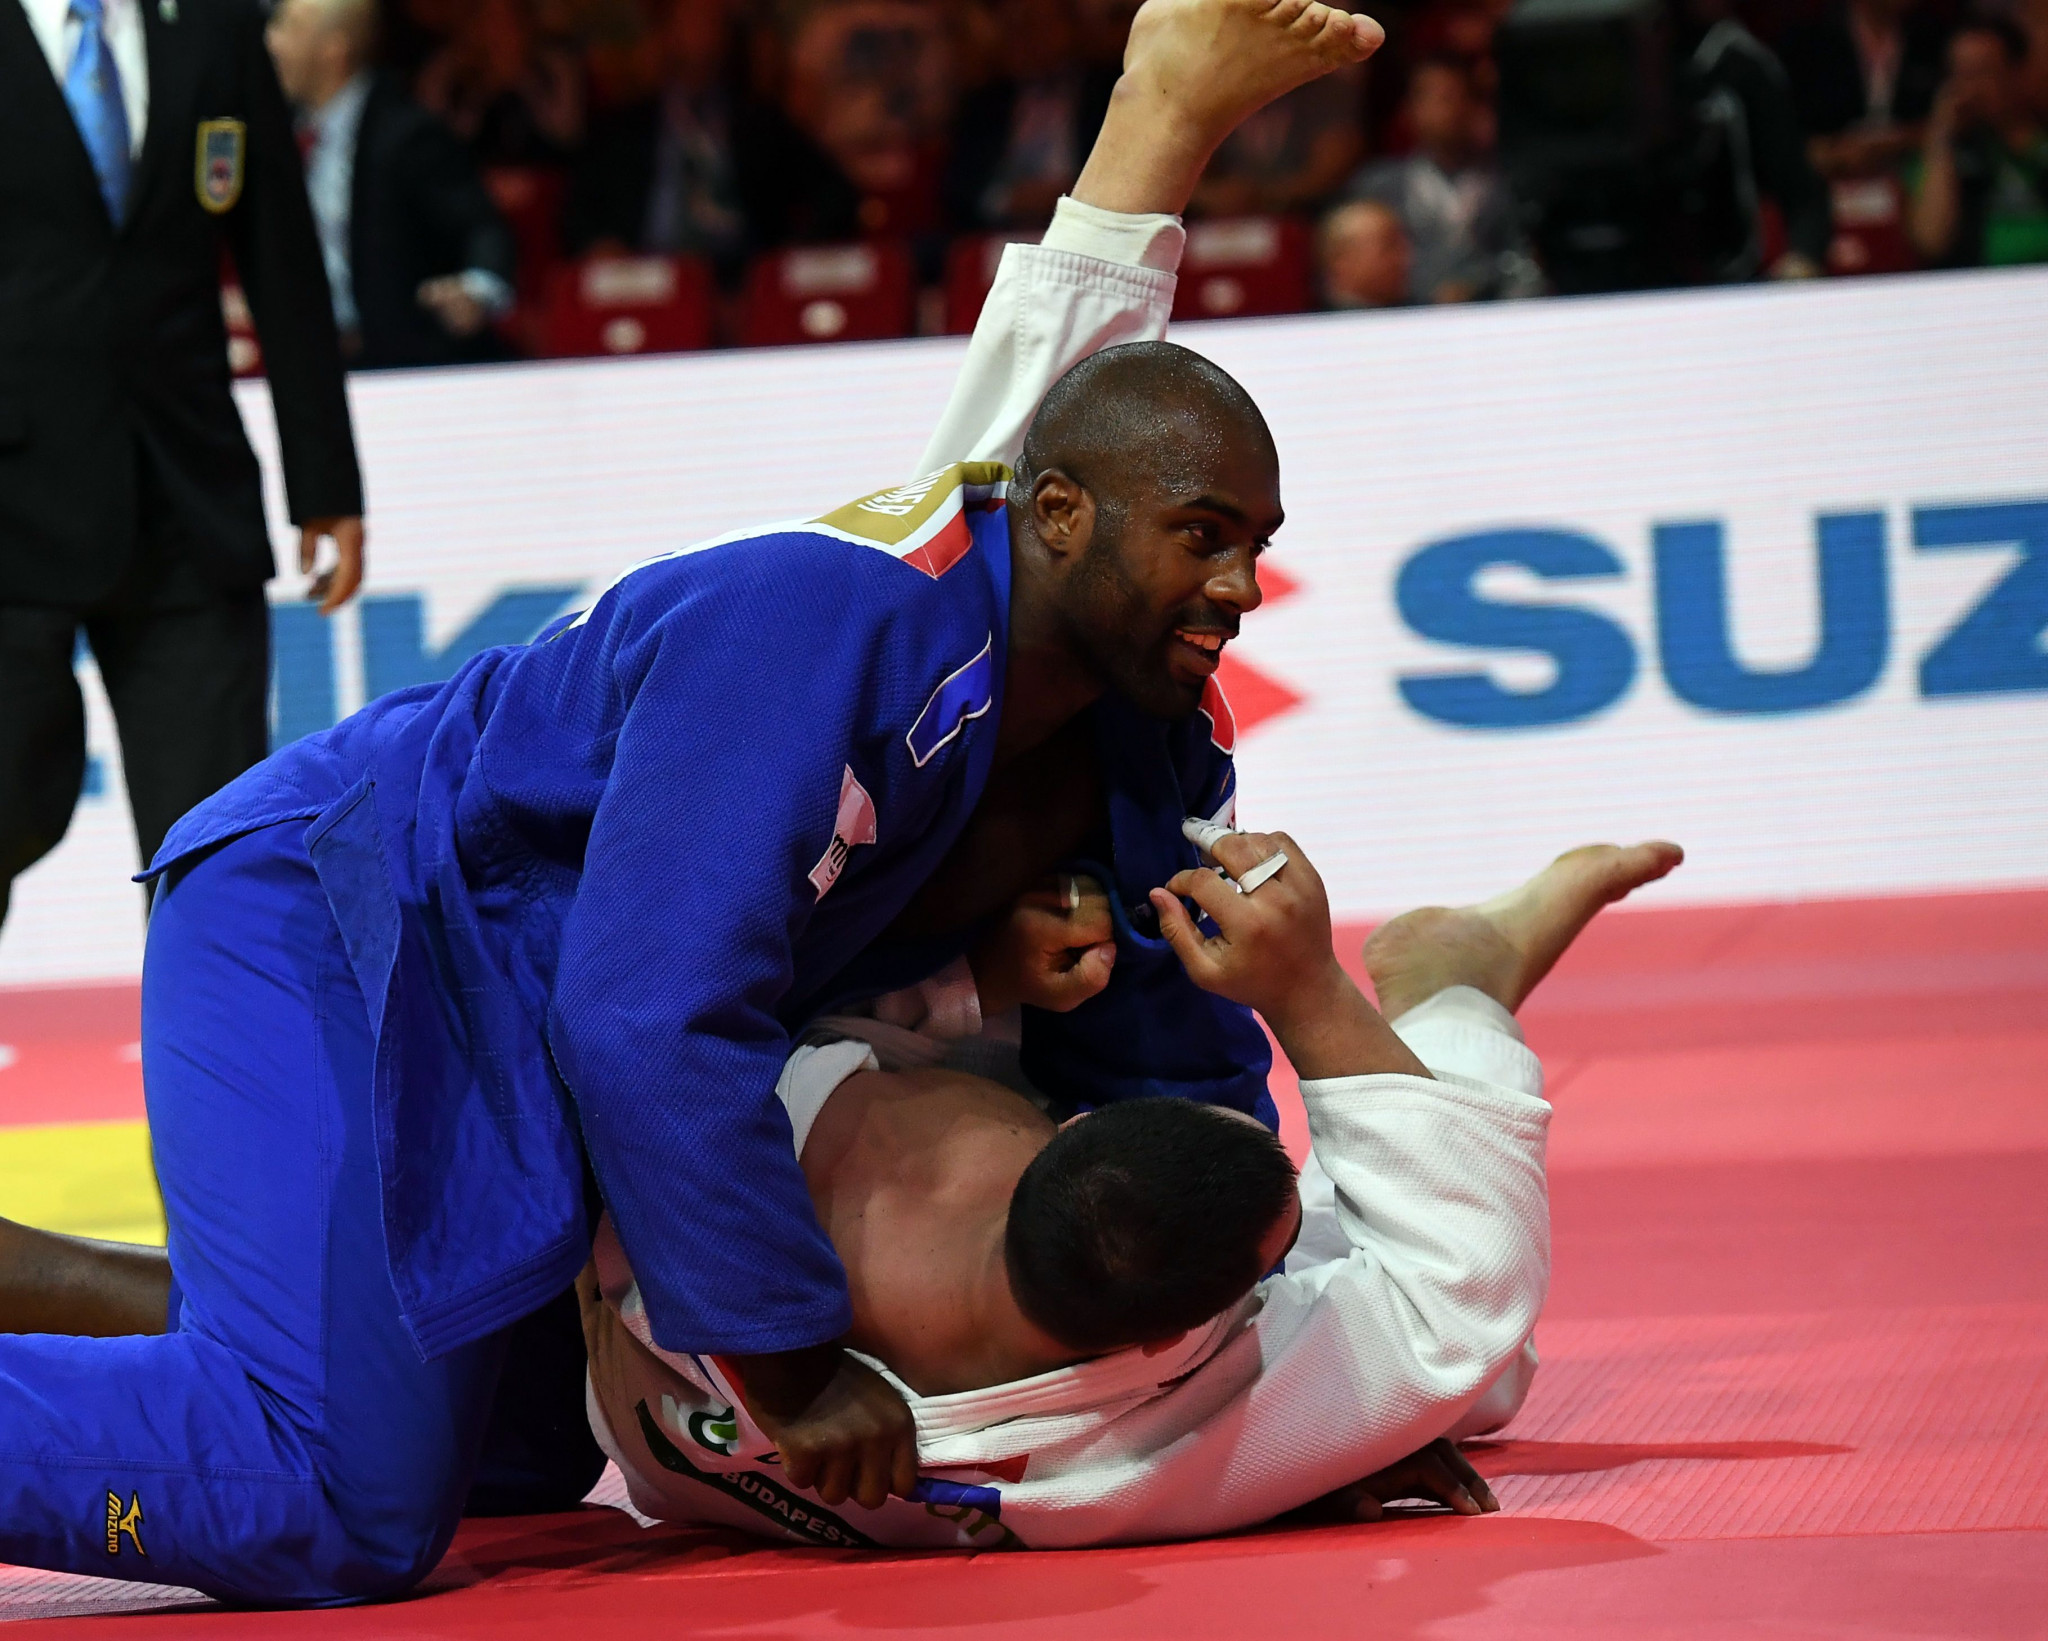 Riner set to make long-awaited return to action at IJF Grand Prix in Montreal